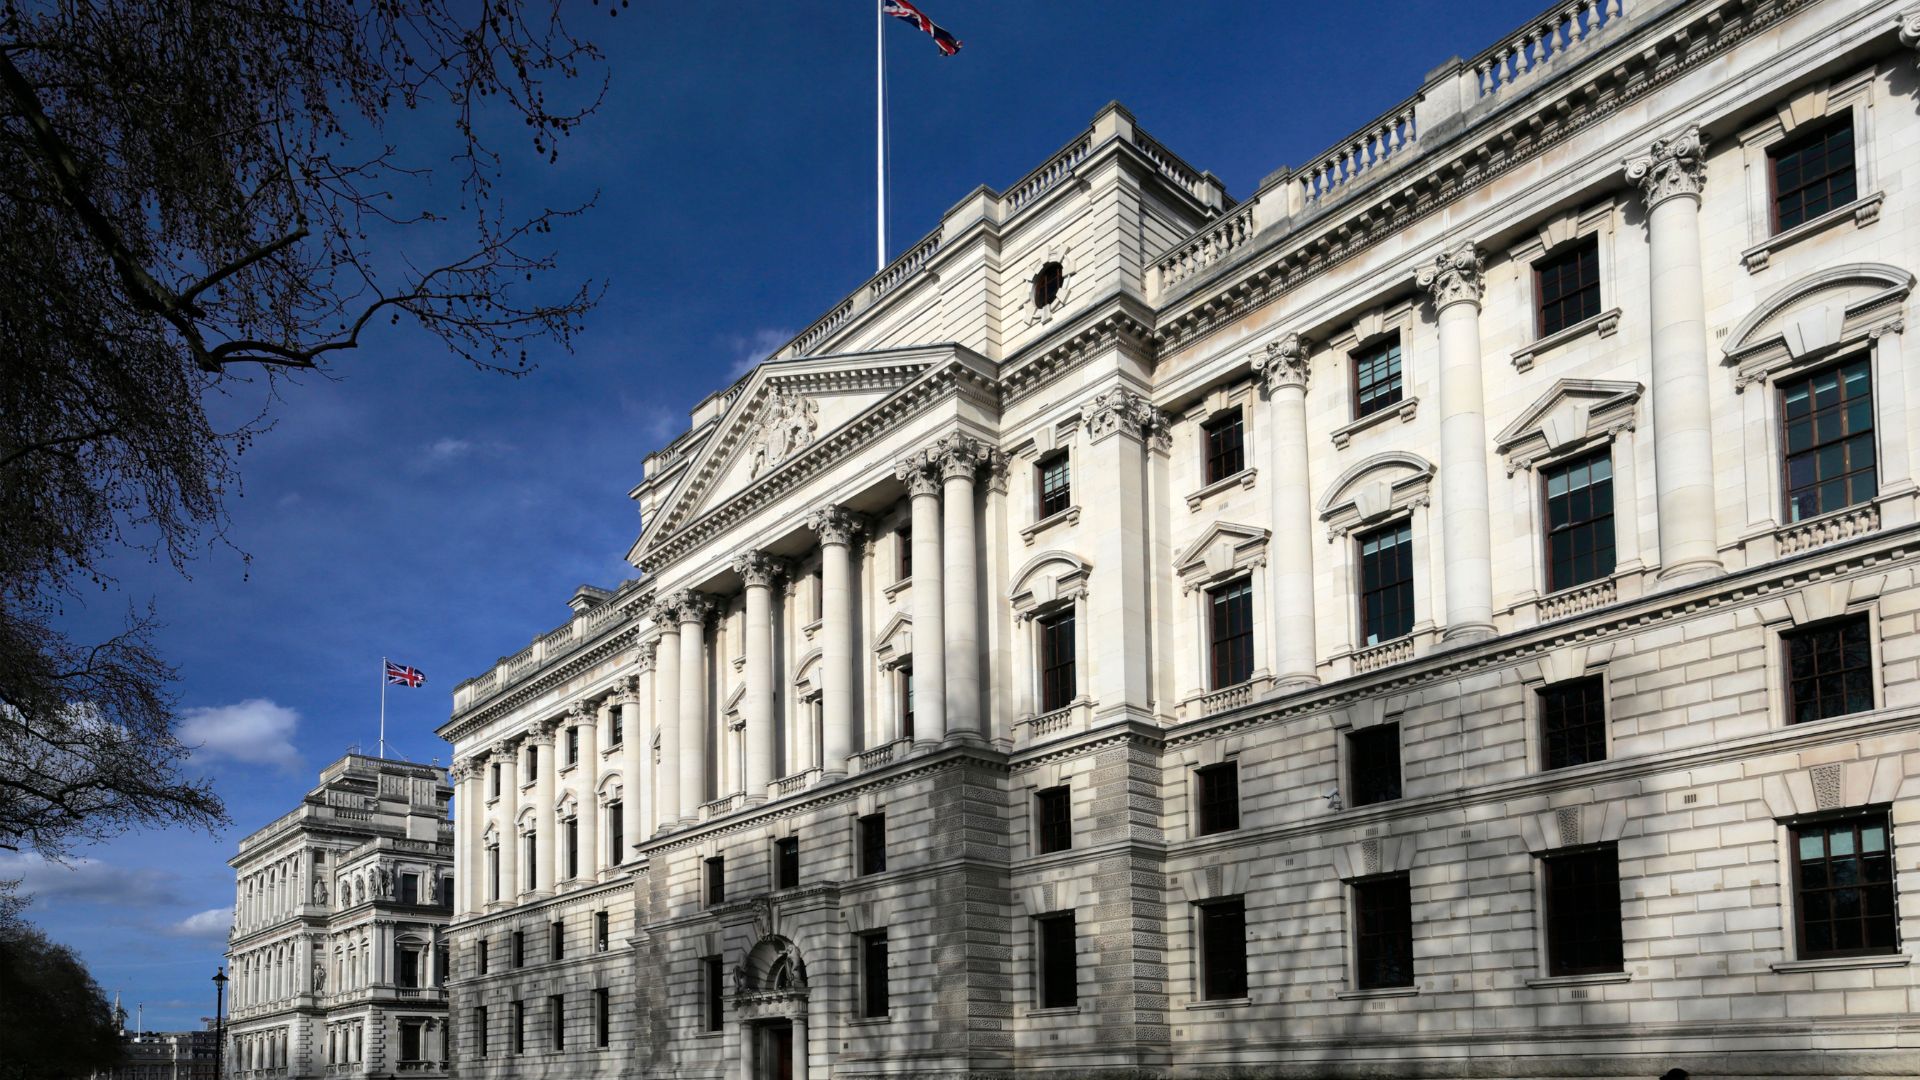 External view of governmental building on Whitehall in the City of Westminster